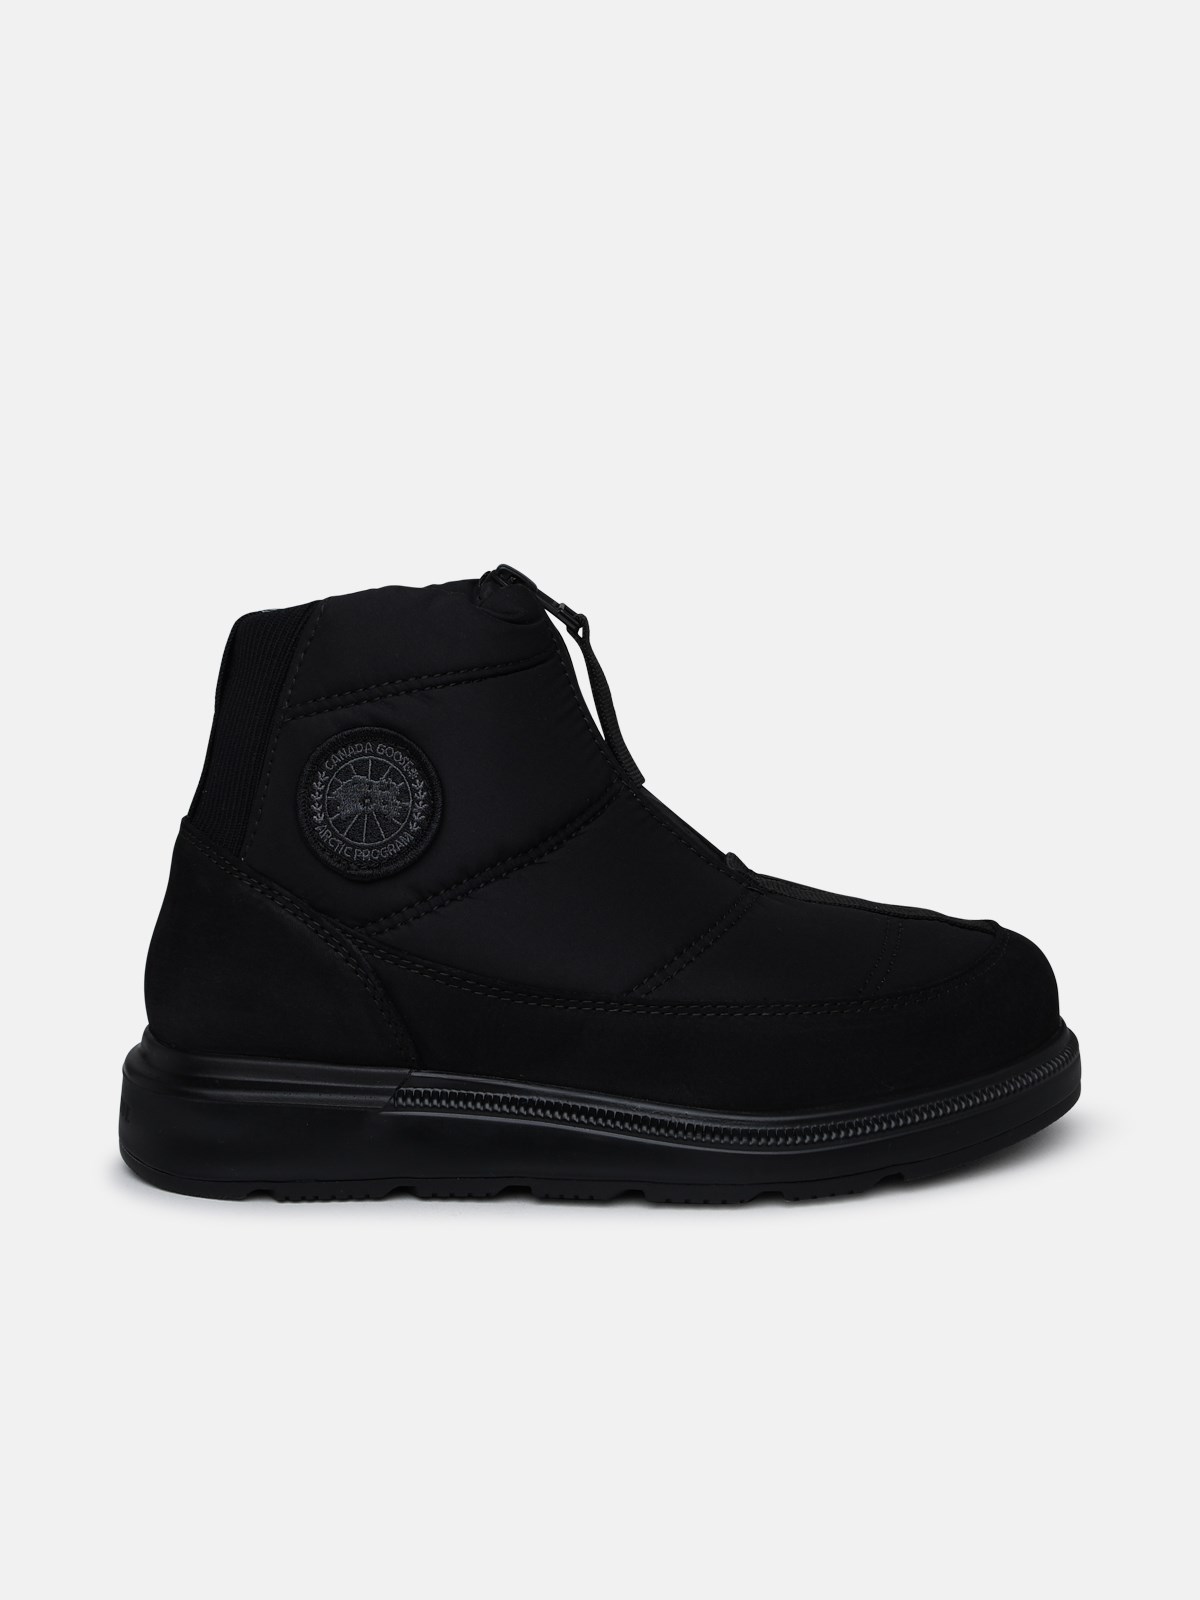 Canada Goose Black Nylon Cypress Down Ankle Boots